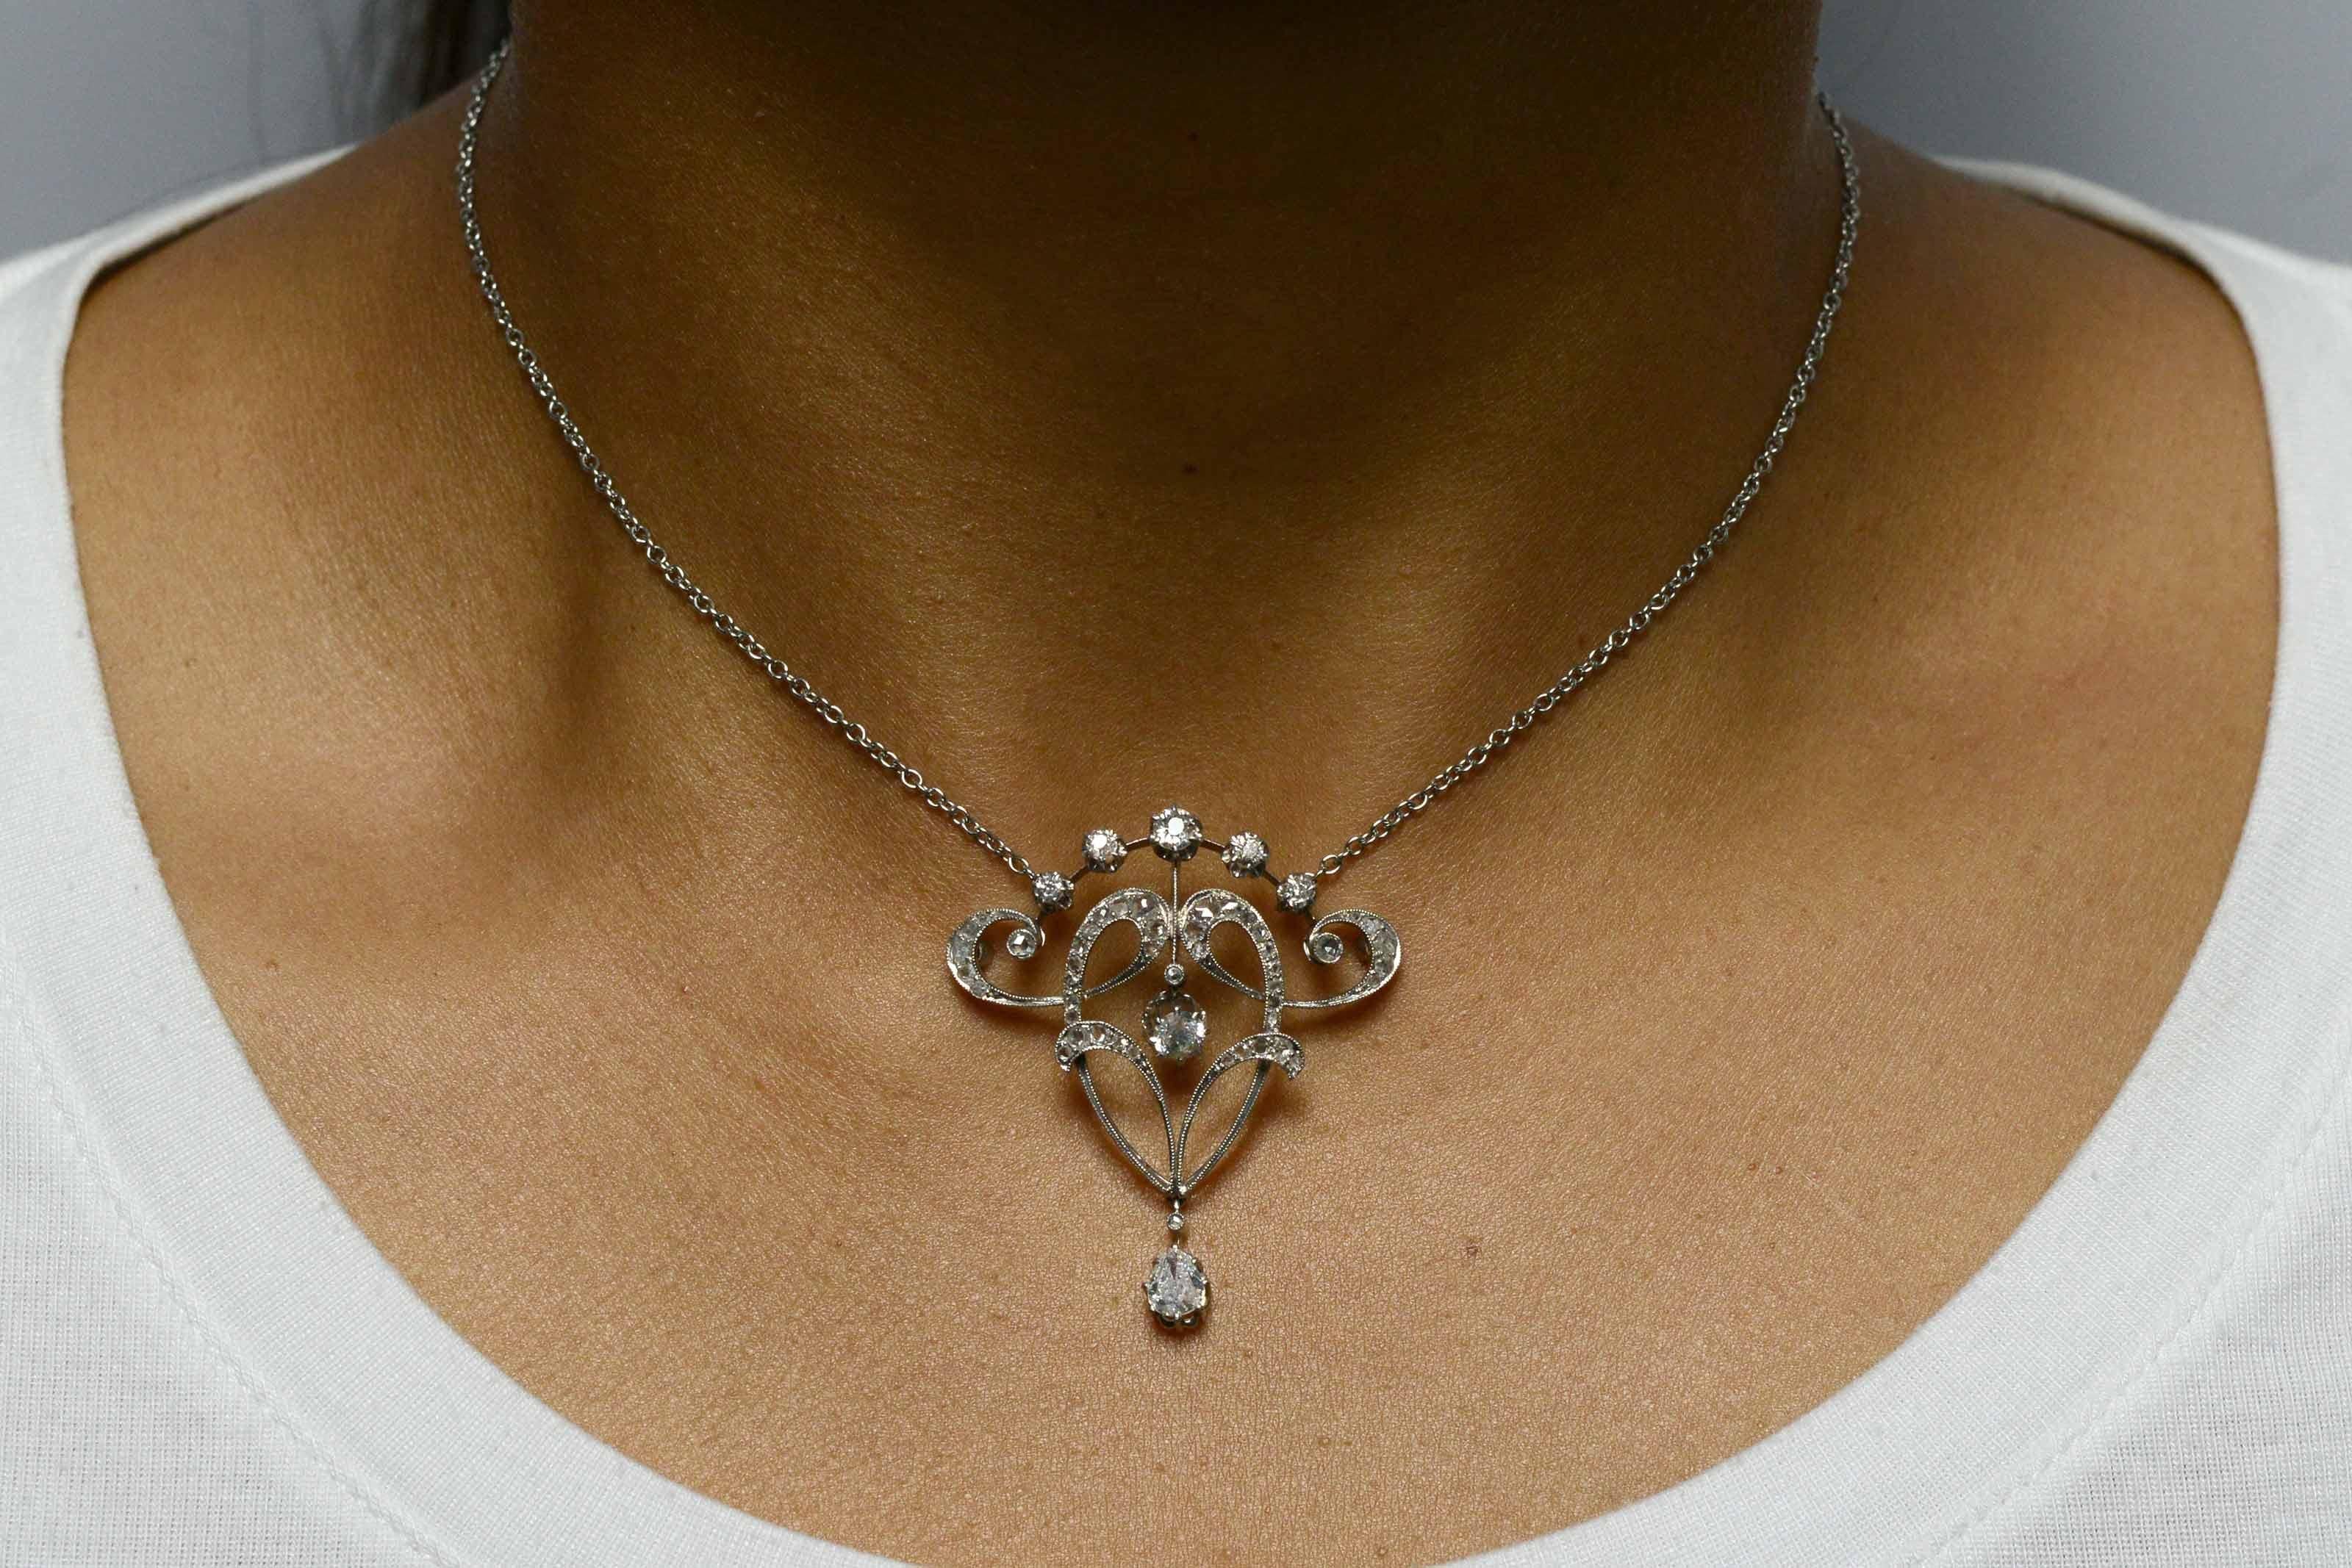 An intriguing antique Edwardian diamond necklace pendant finely handcrafted of platinum with enchanting, swirling foliate swags and garlands, typical of the French Belle Epoque era. Adorned with over 1 carat of twinkling old mine and rose cut